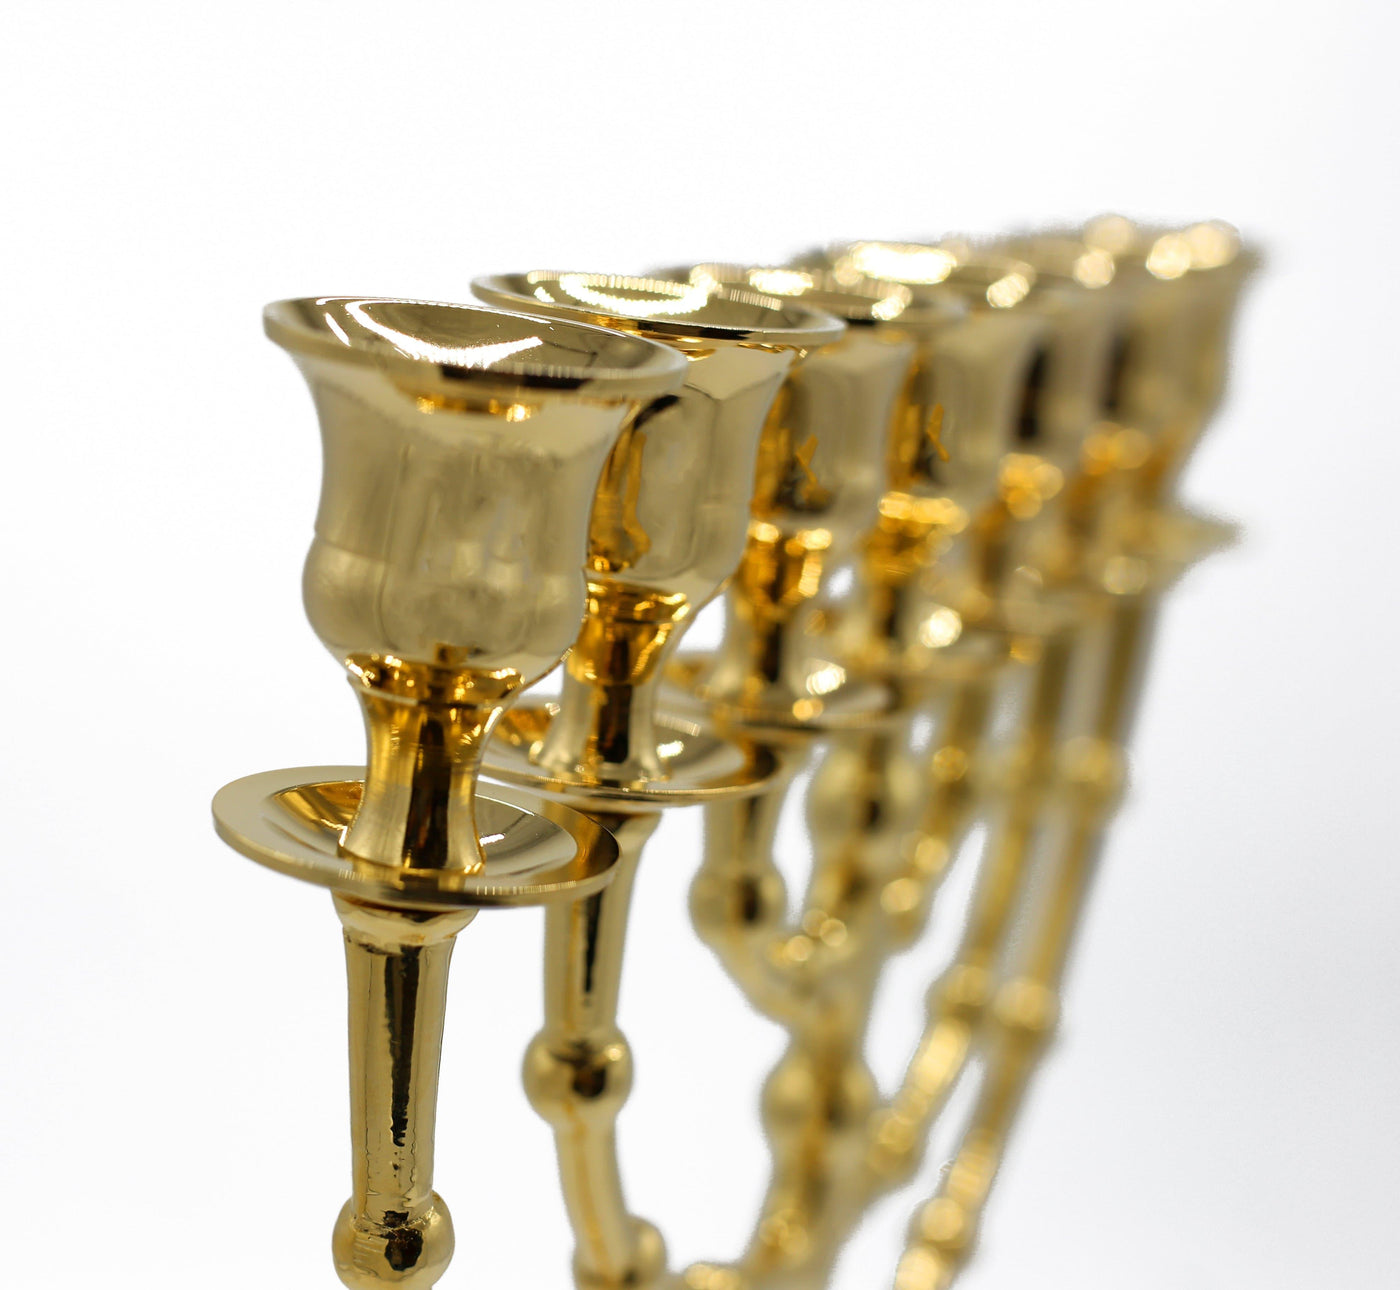 Large Menorah Gold Plated from Holy Land Jerusalem 17inch / 43cm.